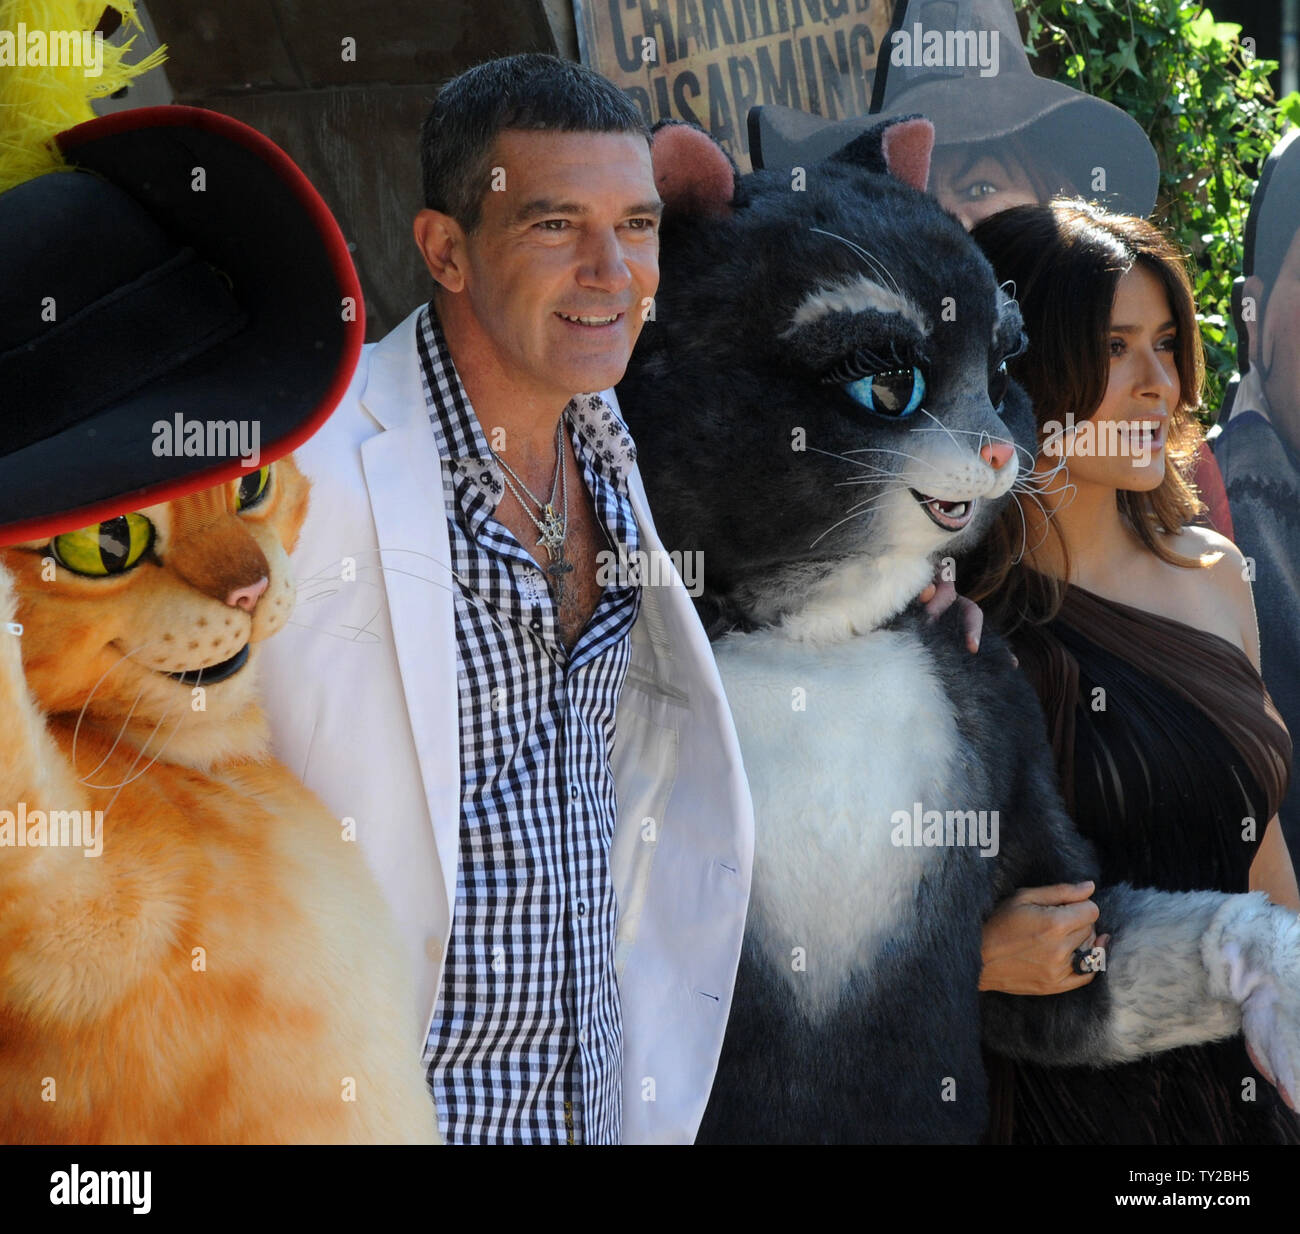 Actors Antonio Banderas (L), the voice of Puss in Boots and Salma Hayek,  the voice Kitty Southpaw in the animated motion picture comedy "Puss In  Boots", arrive for the premiere of the